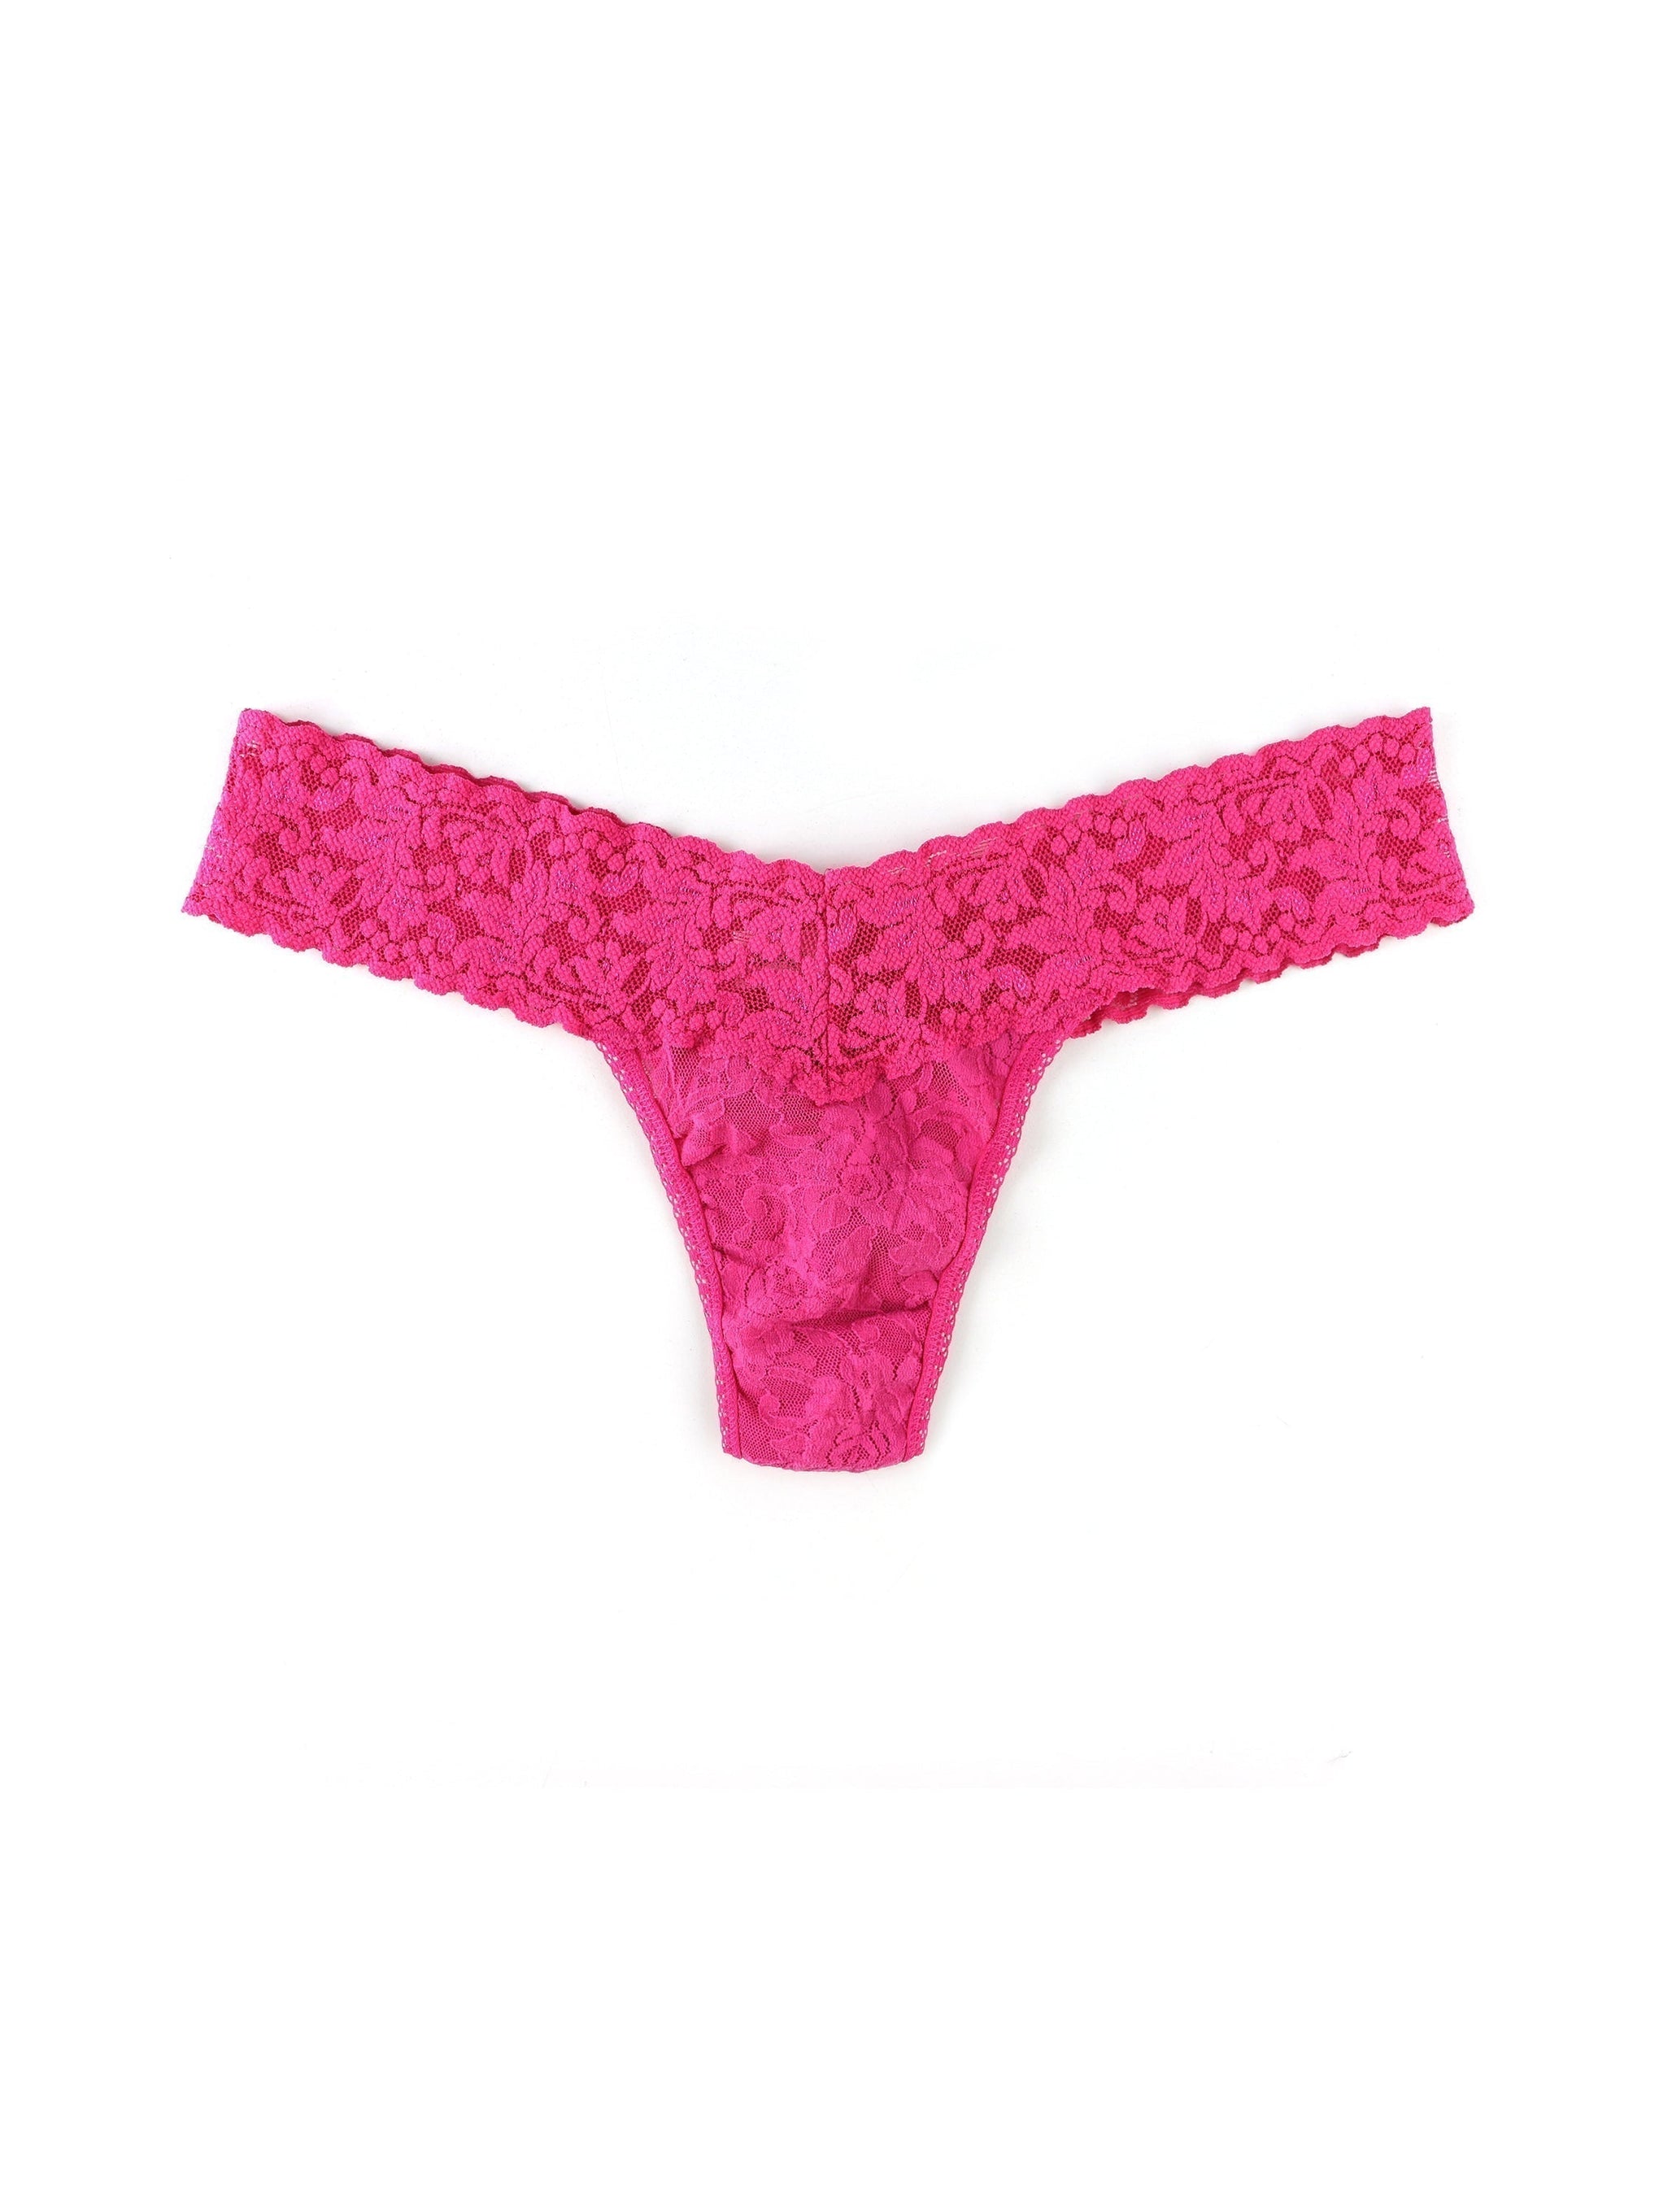 5 Cotton Low Rise Thong In Pink, Chateau pink, Lavender, Blue & Indigo -  Hanky Panky